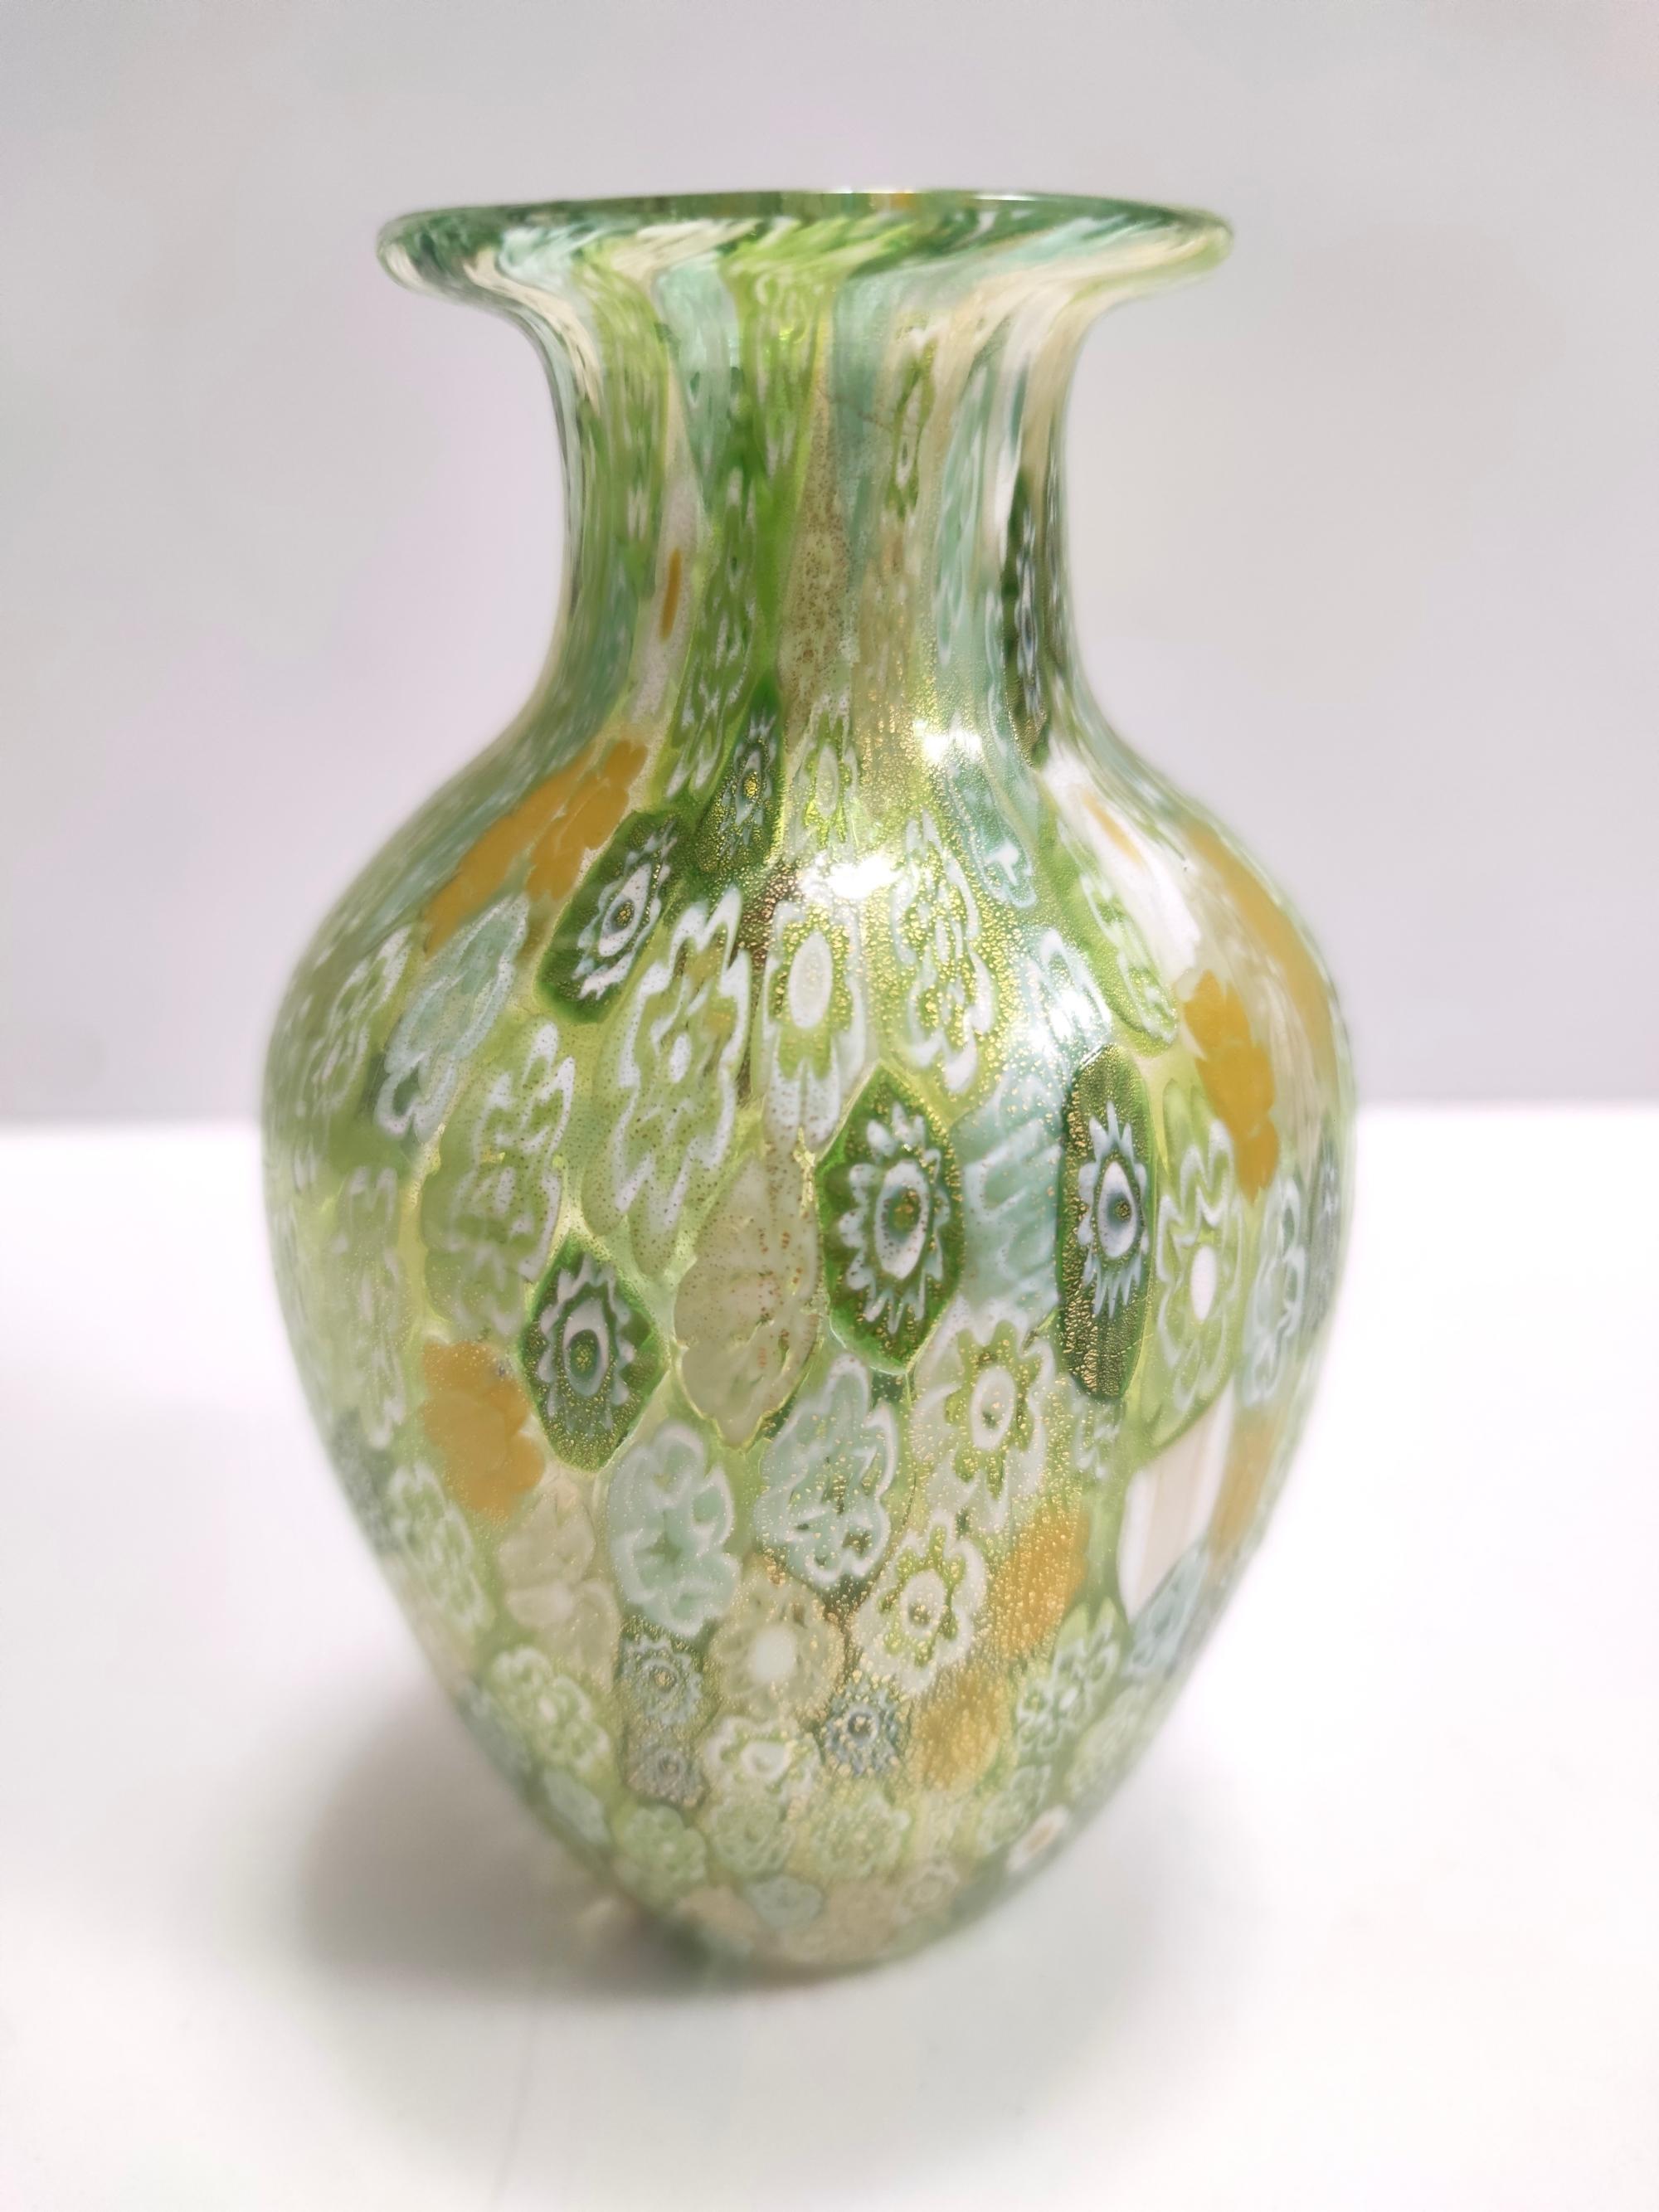 Late 20th Century Postmodern Millefiori Green Murano Glass Vase with Murrines and Gold Leaf, Italy For Sale